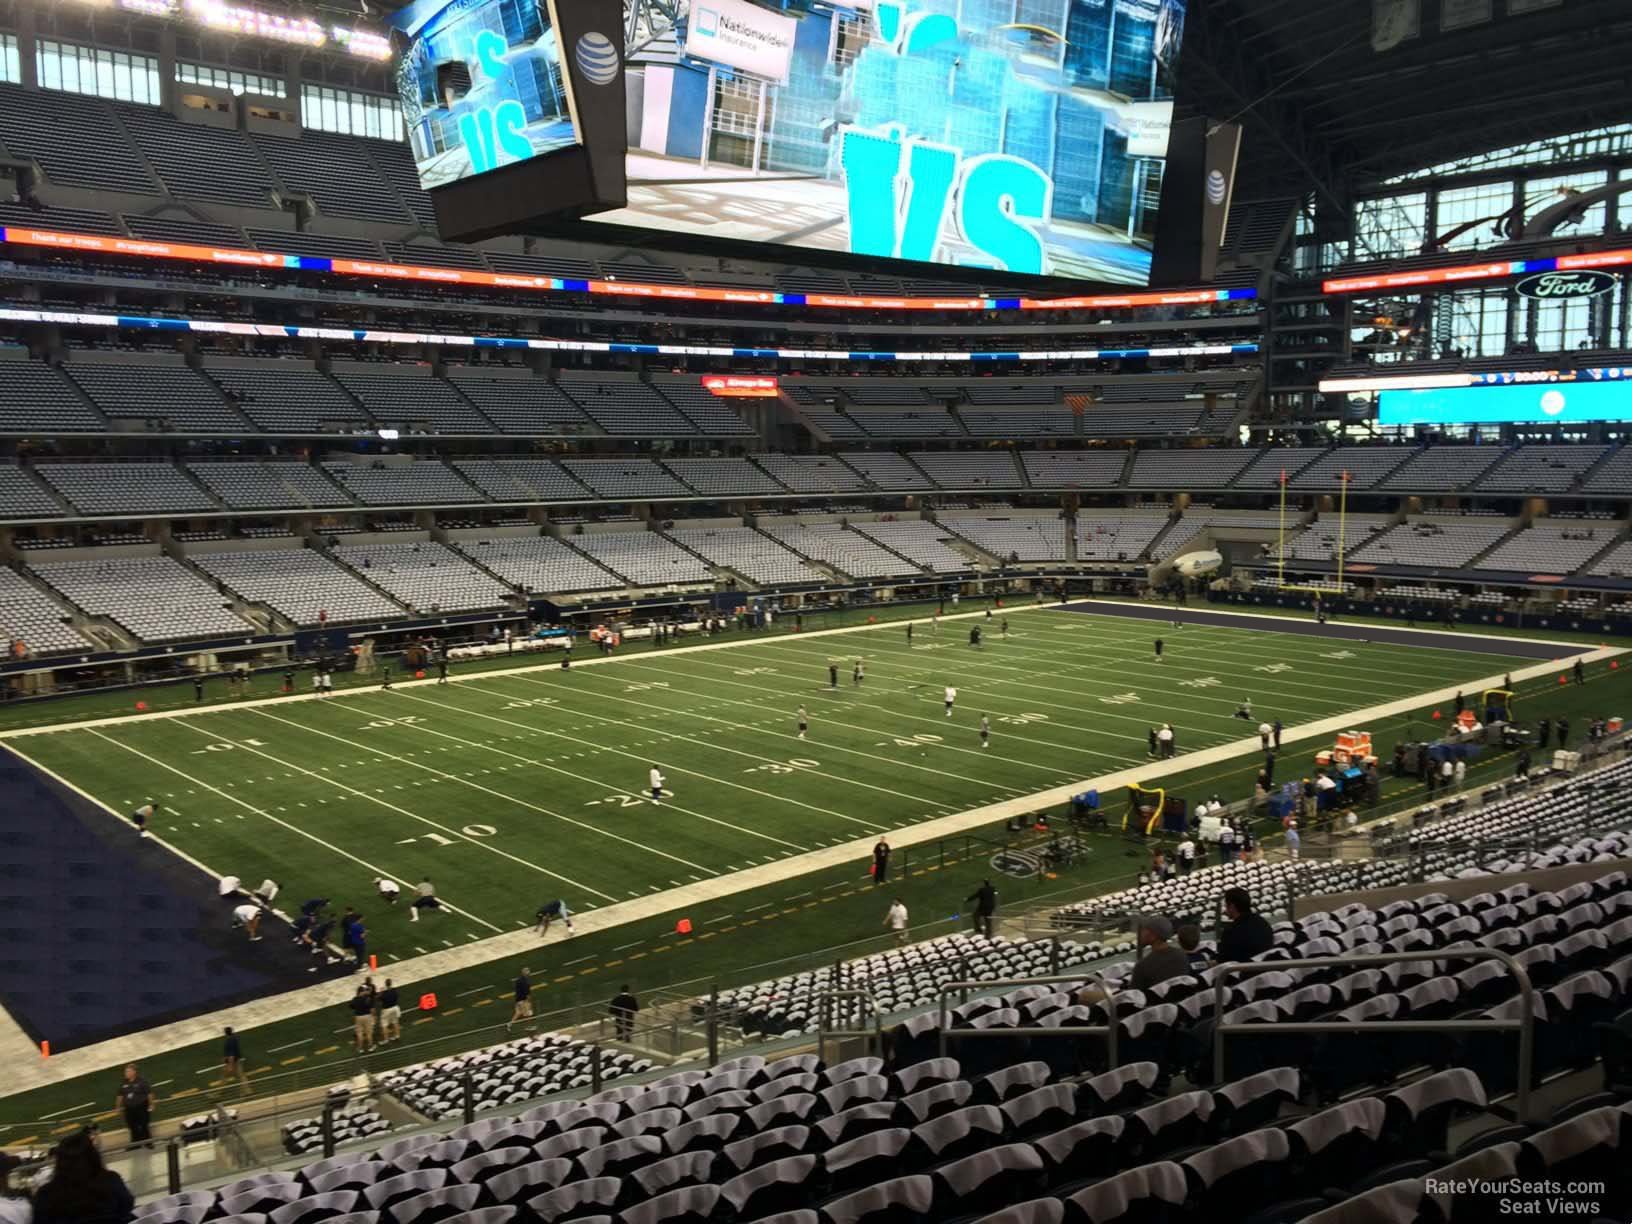 section 216, row 13 seat view  for football - at&t stadium (cowboys stadium)